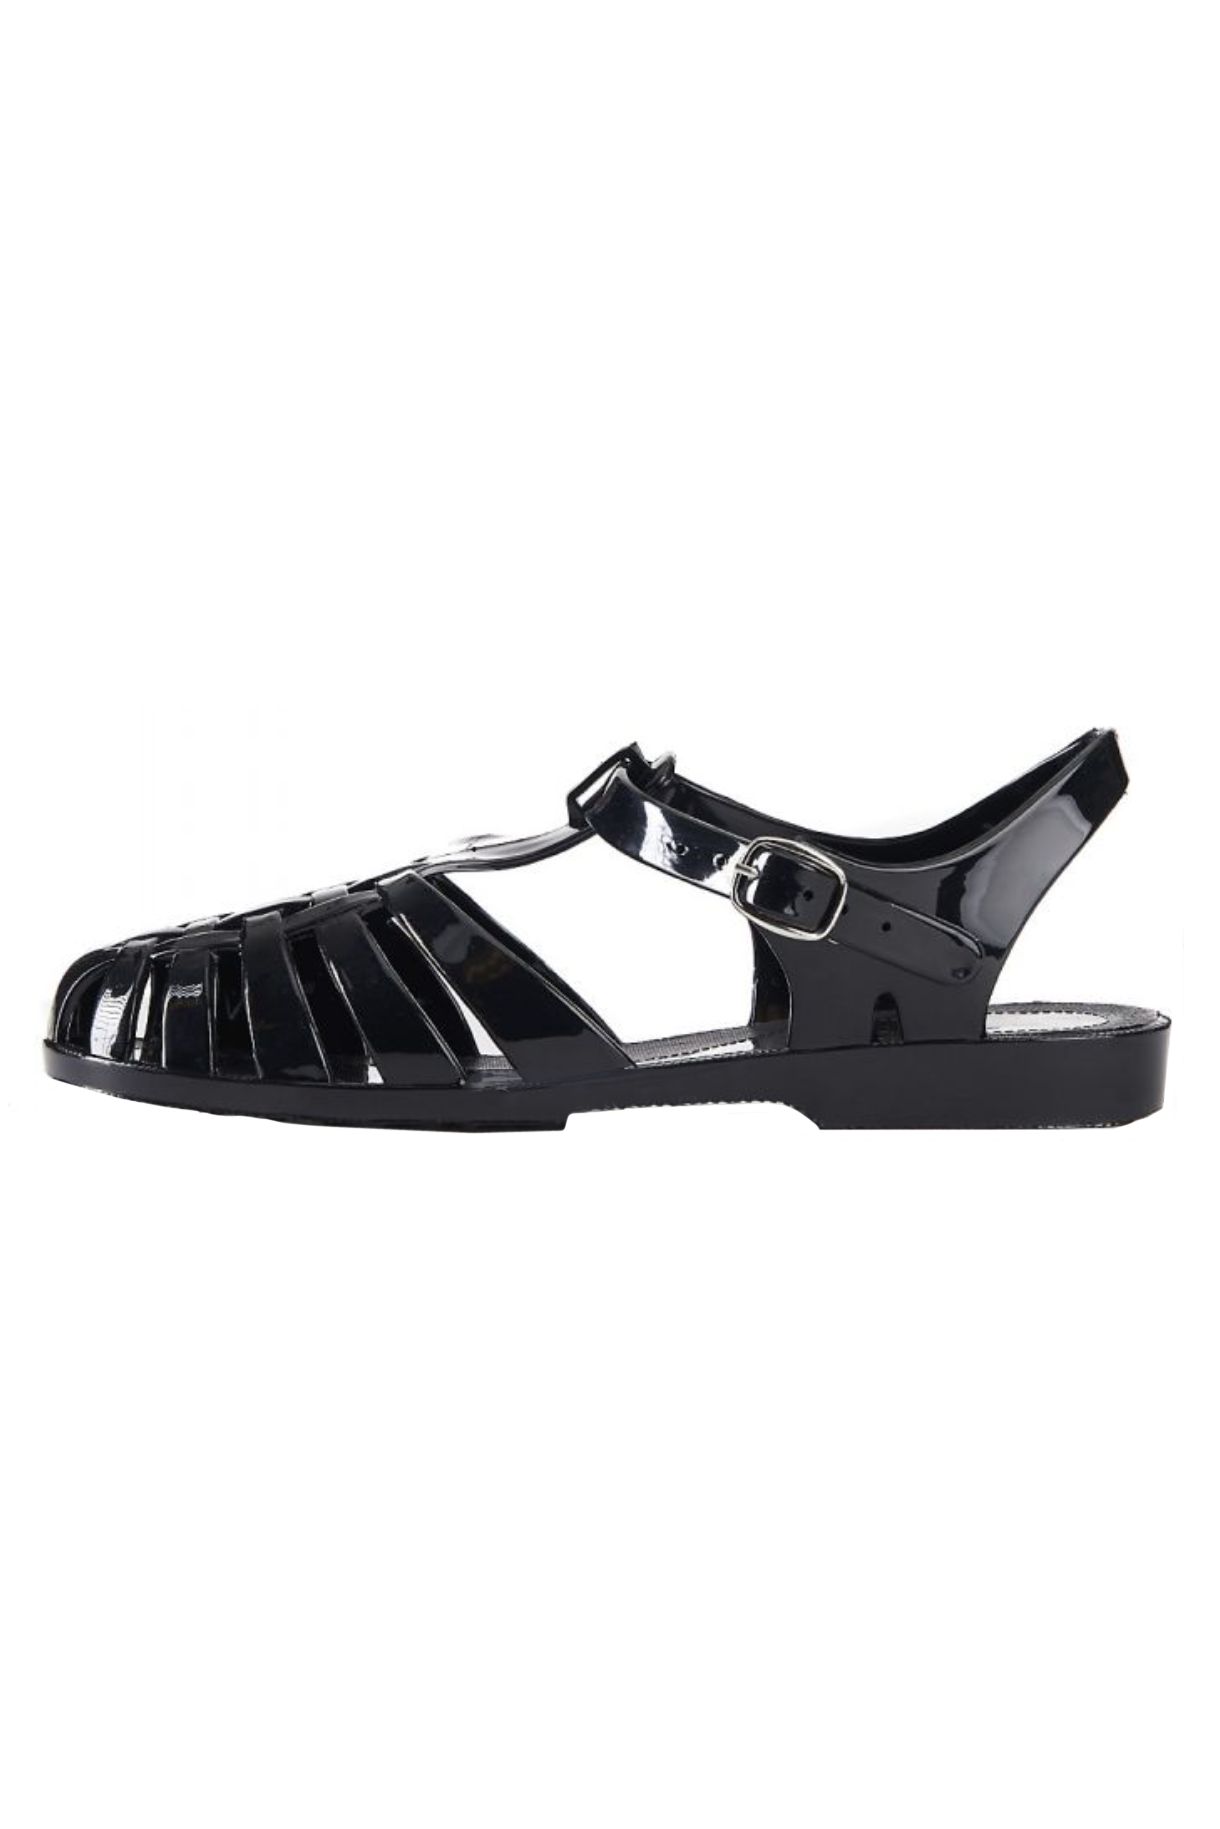 8 Best Jelly Sandals 2021 | Jelly Shoes 